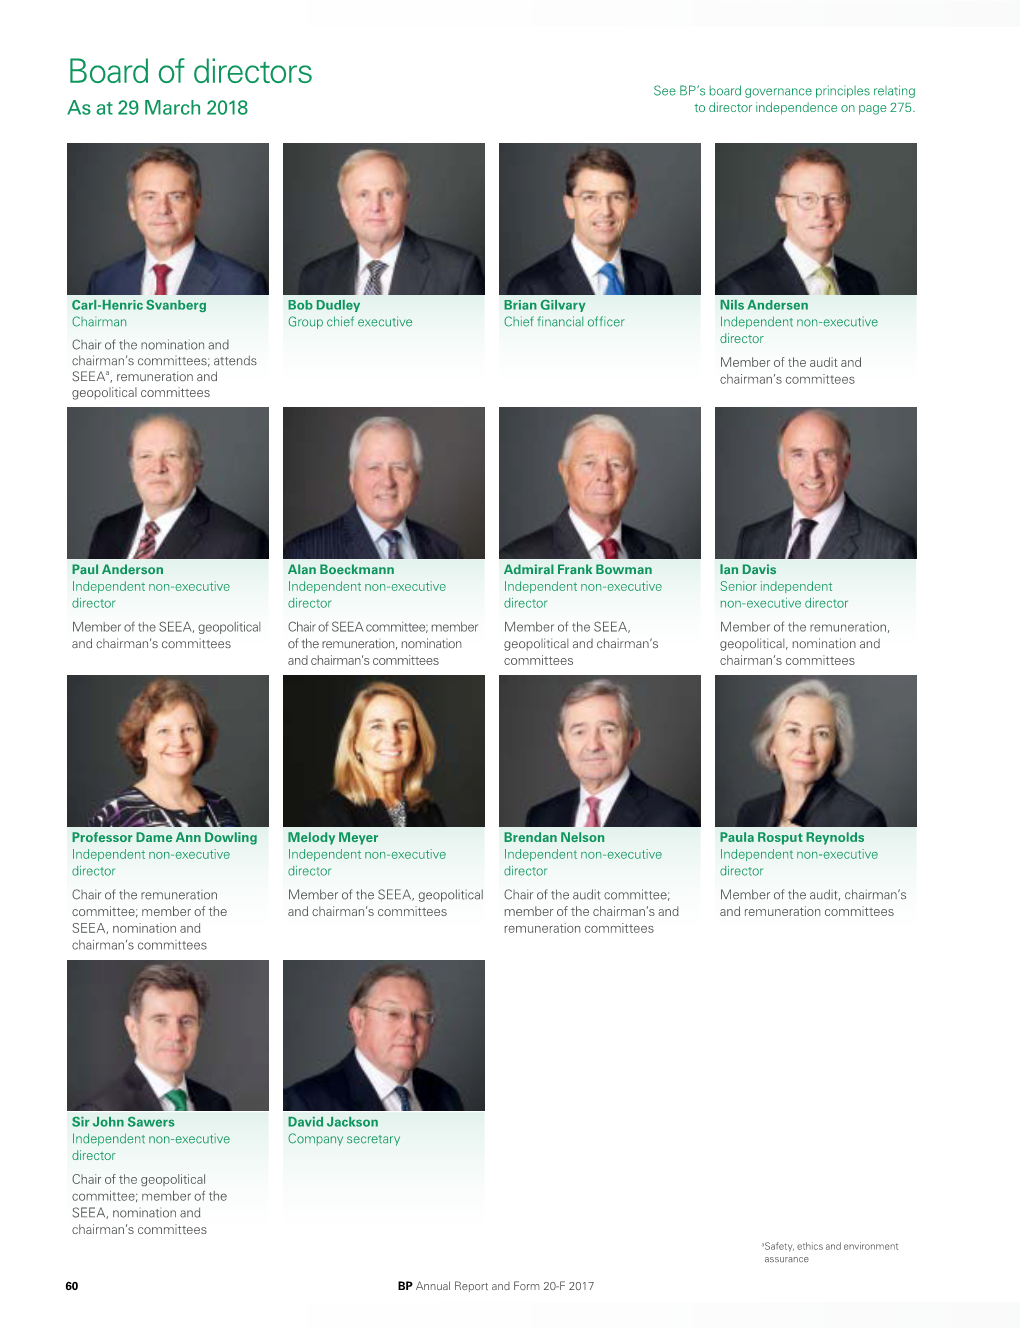 Board of Directors See BP’S Board Governance Principles Relating As at 29 March 2018 to Director Independence on Page 275